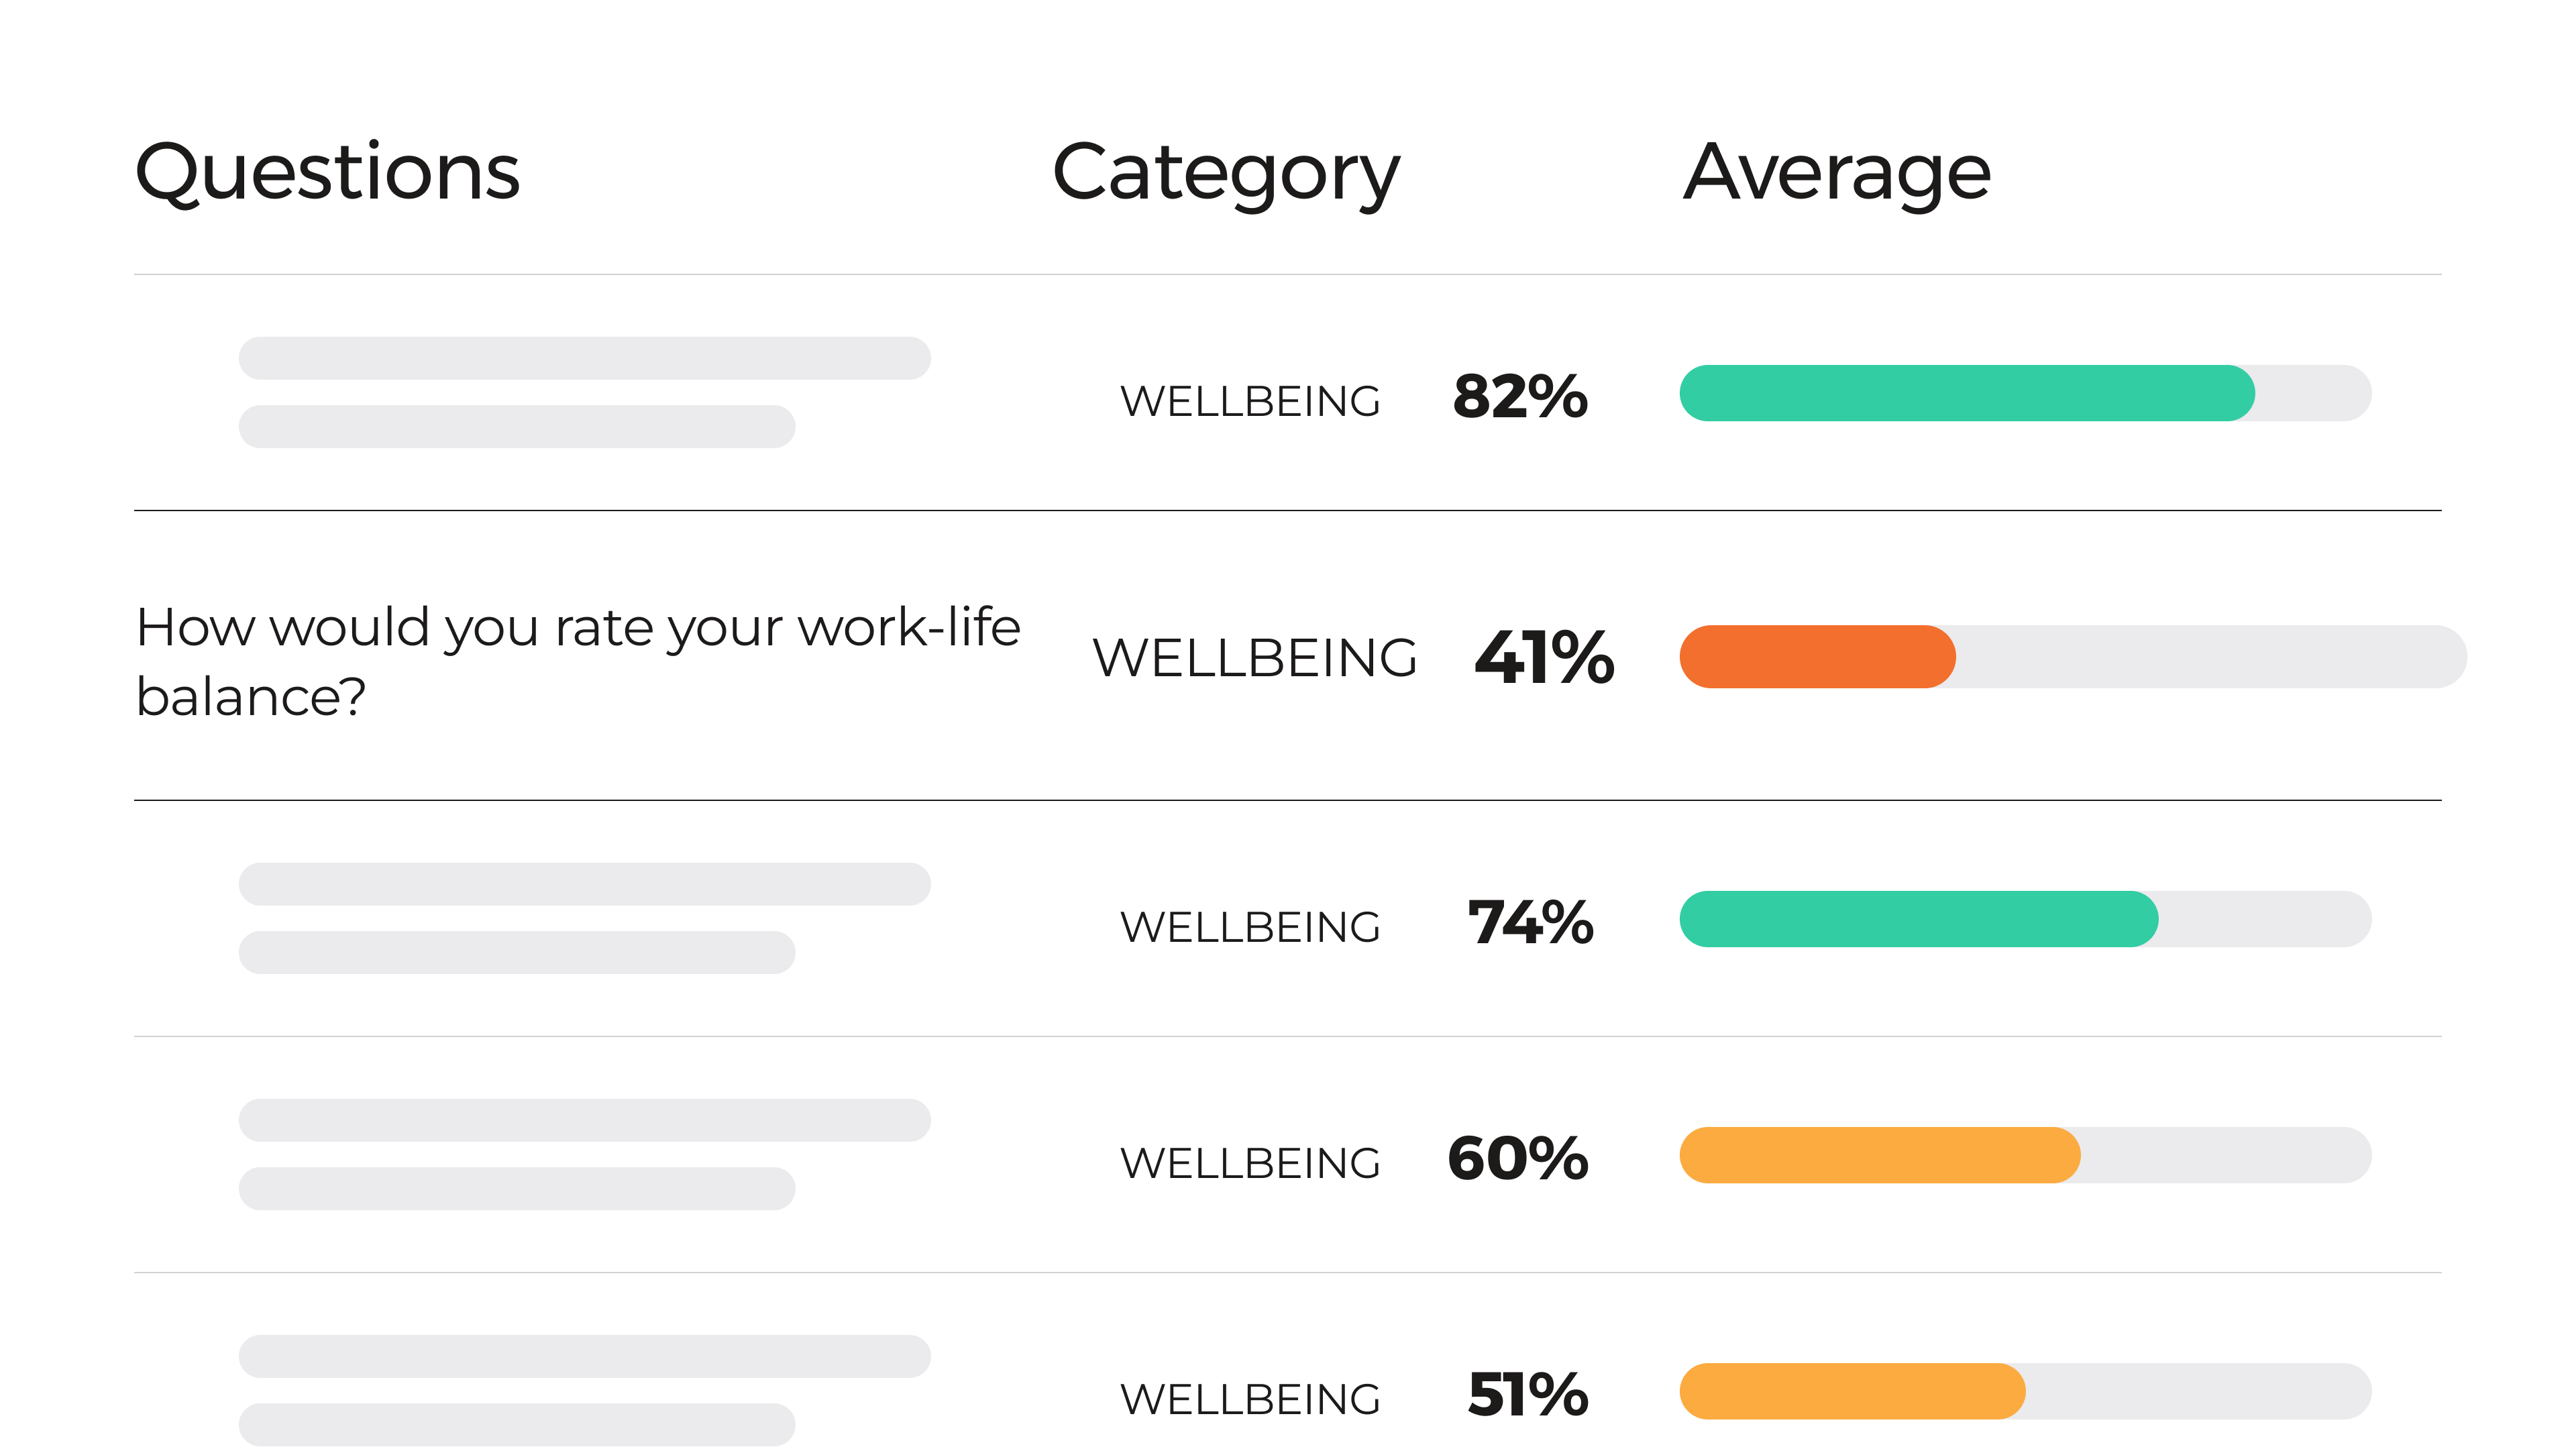 Showing survey results measuring workplace wellbeing